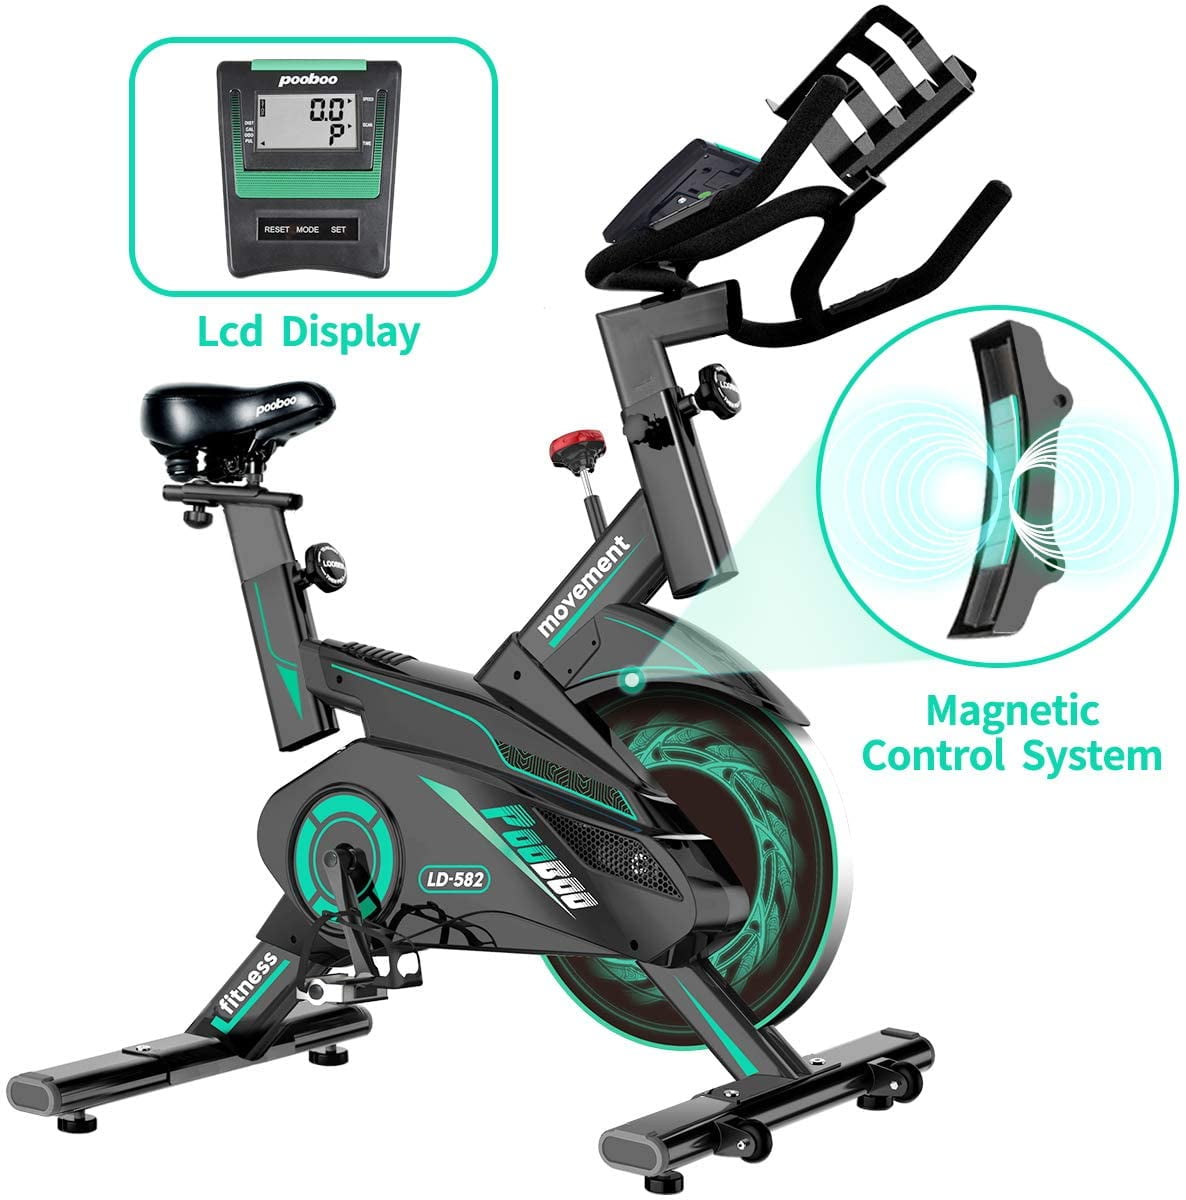 l now indoor cycling bike